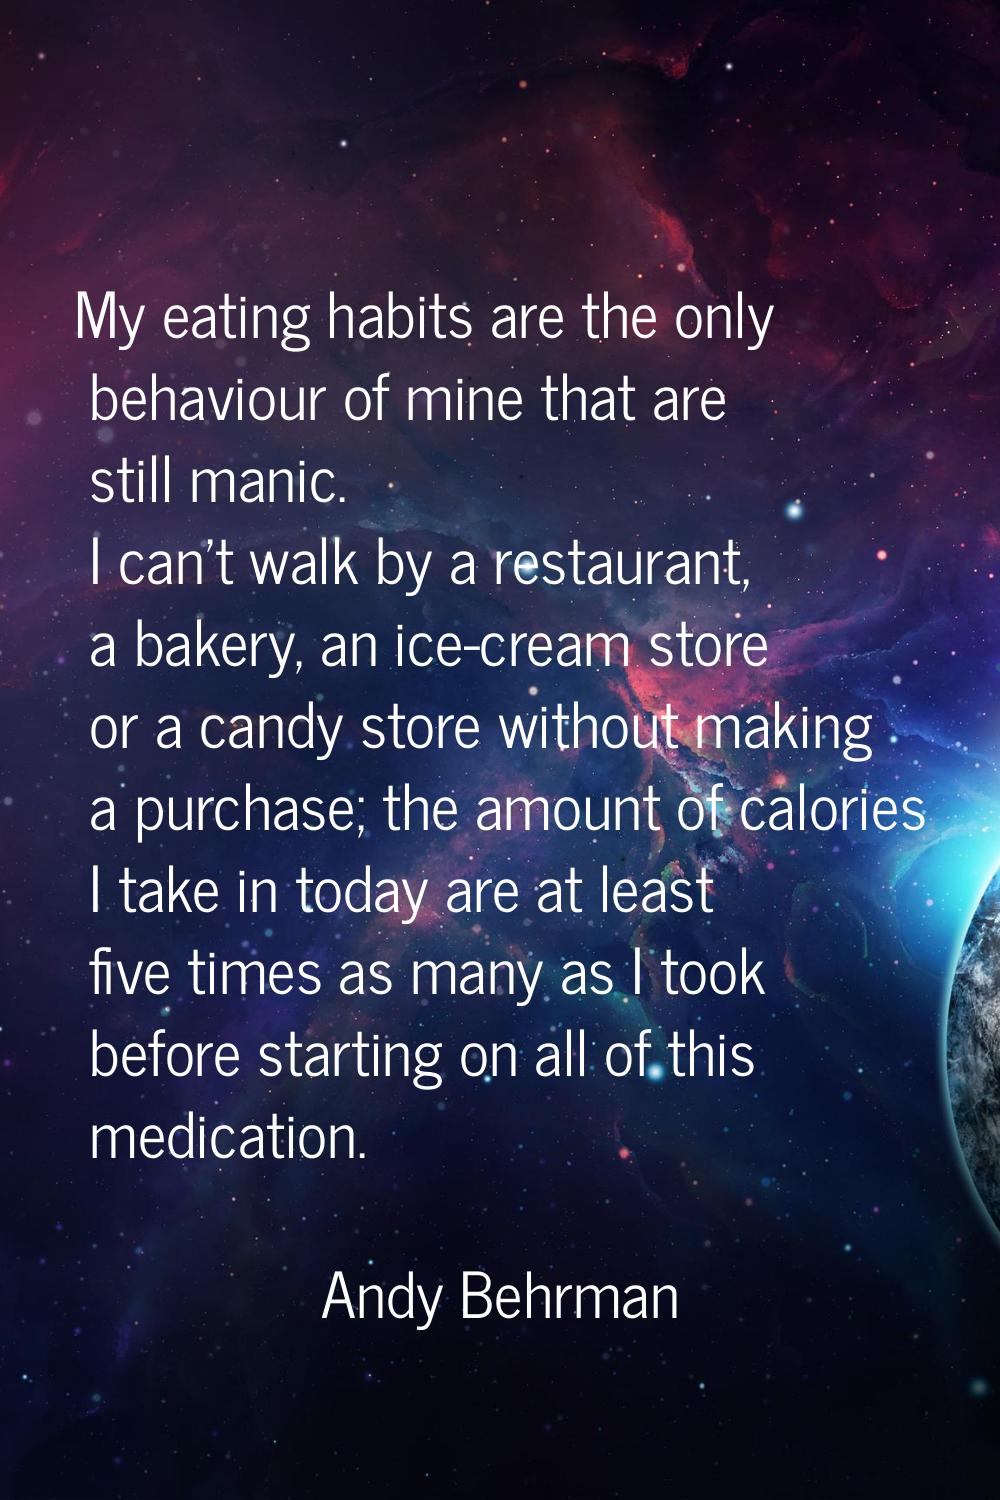 My eating habits are the only behaviour of mine that are still manic. I can't walk by a restaurant,